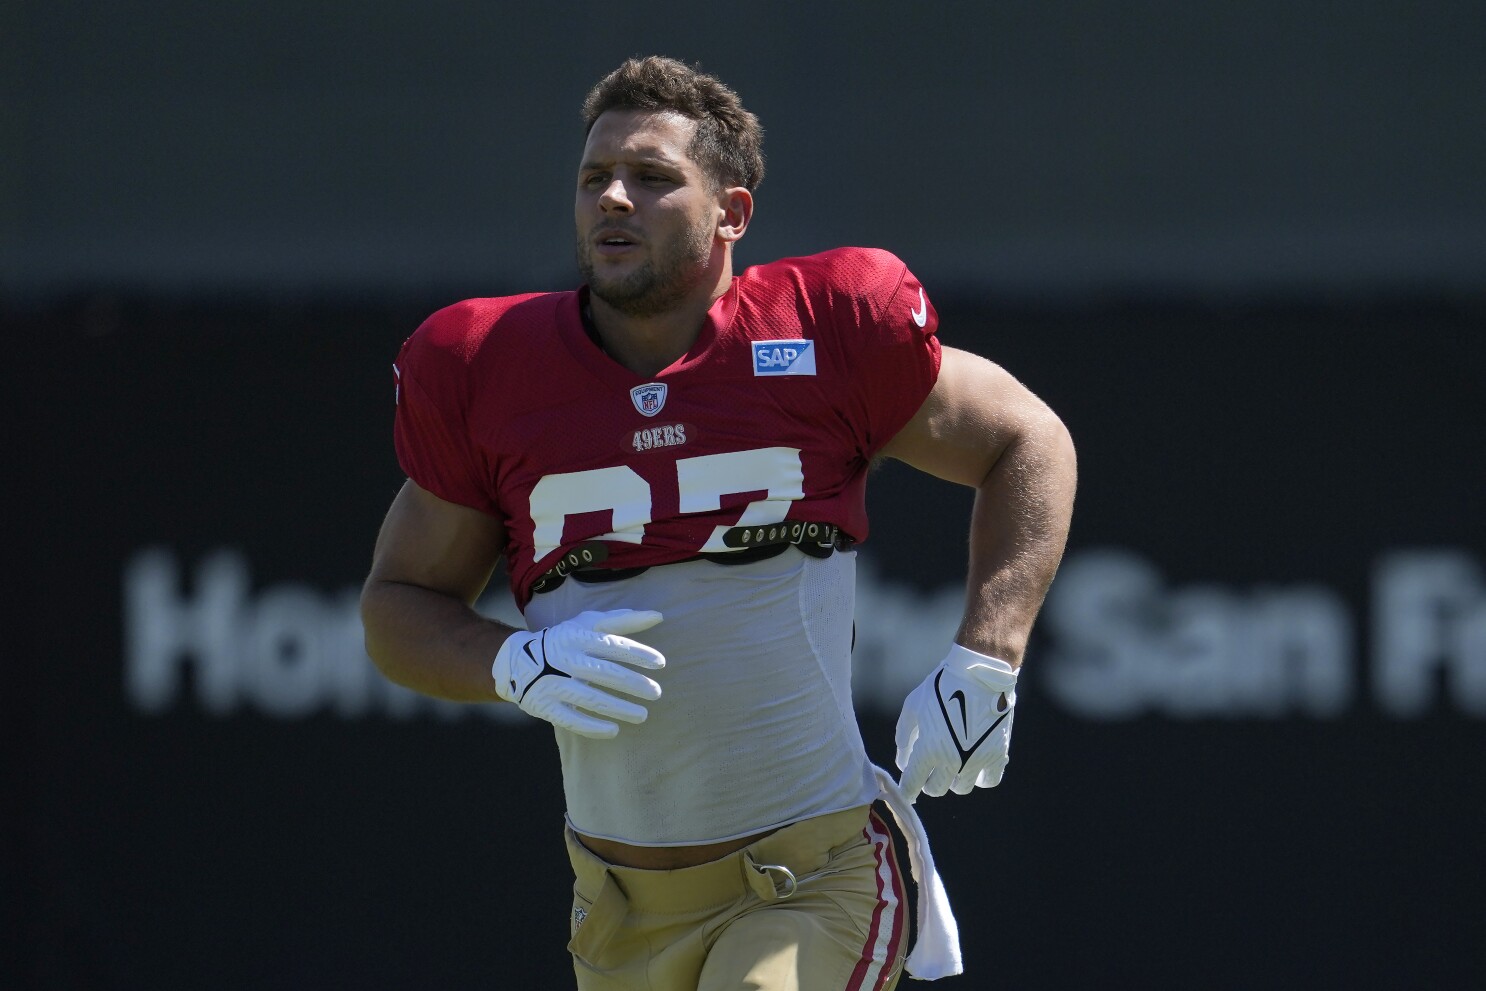 49ers are excited to get Defensive Player of the Year Nick Bosa